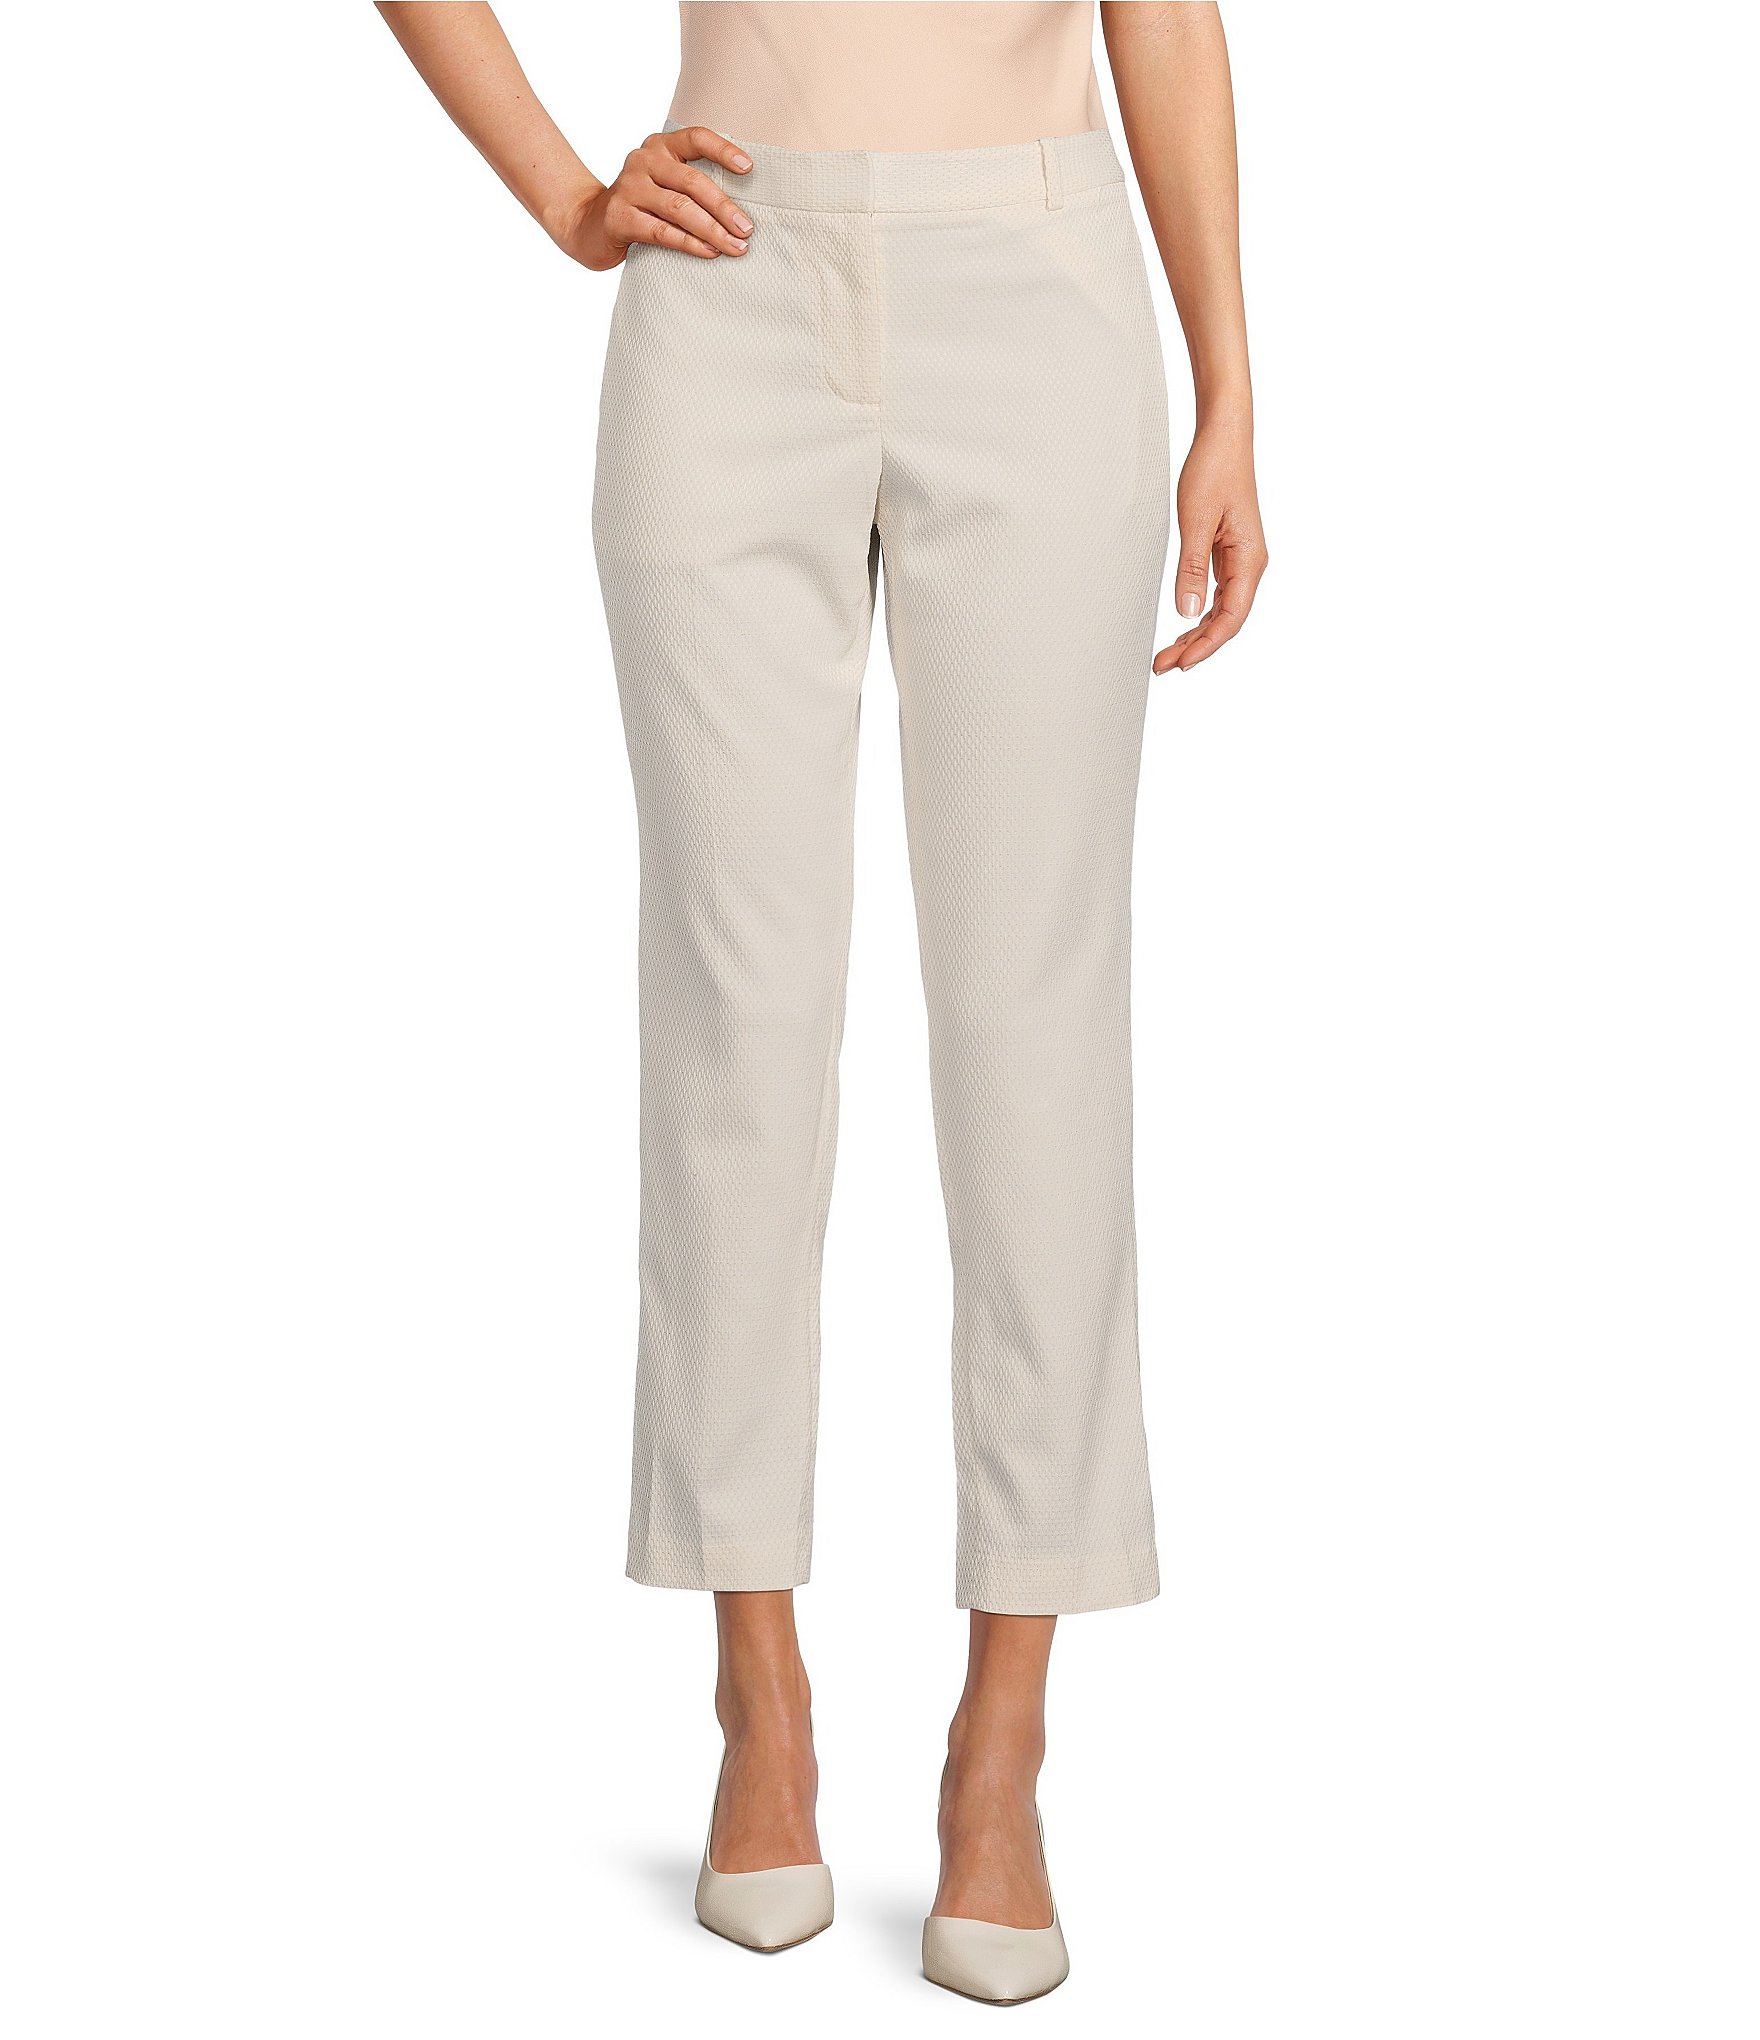 DKNY Essex Jacquard Dotted Flat Front Ankle Straight Leg Pant | Dillard's